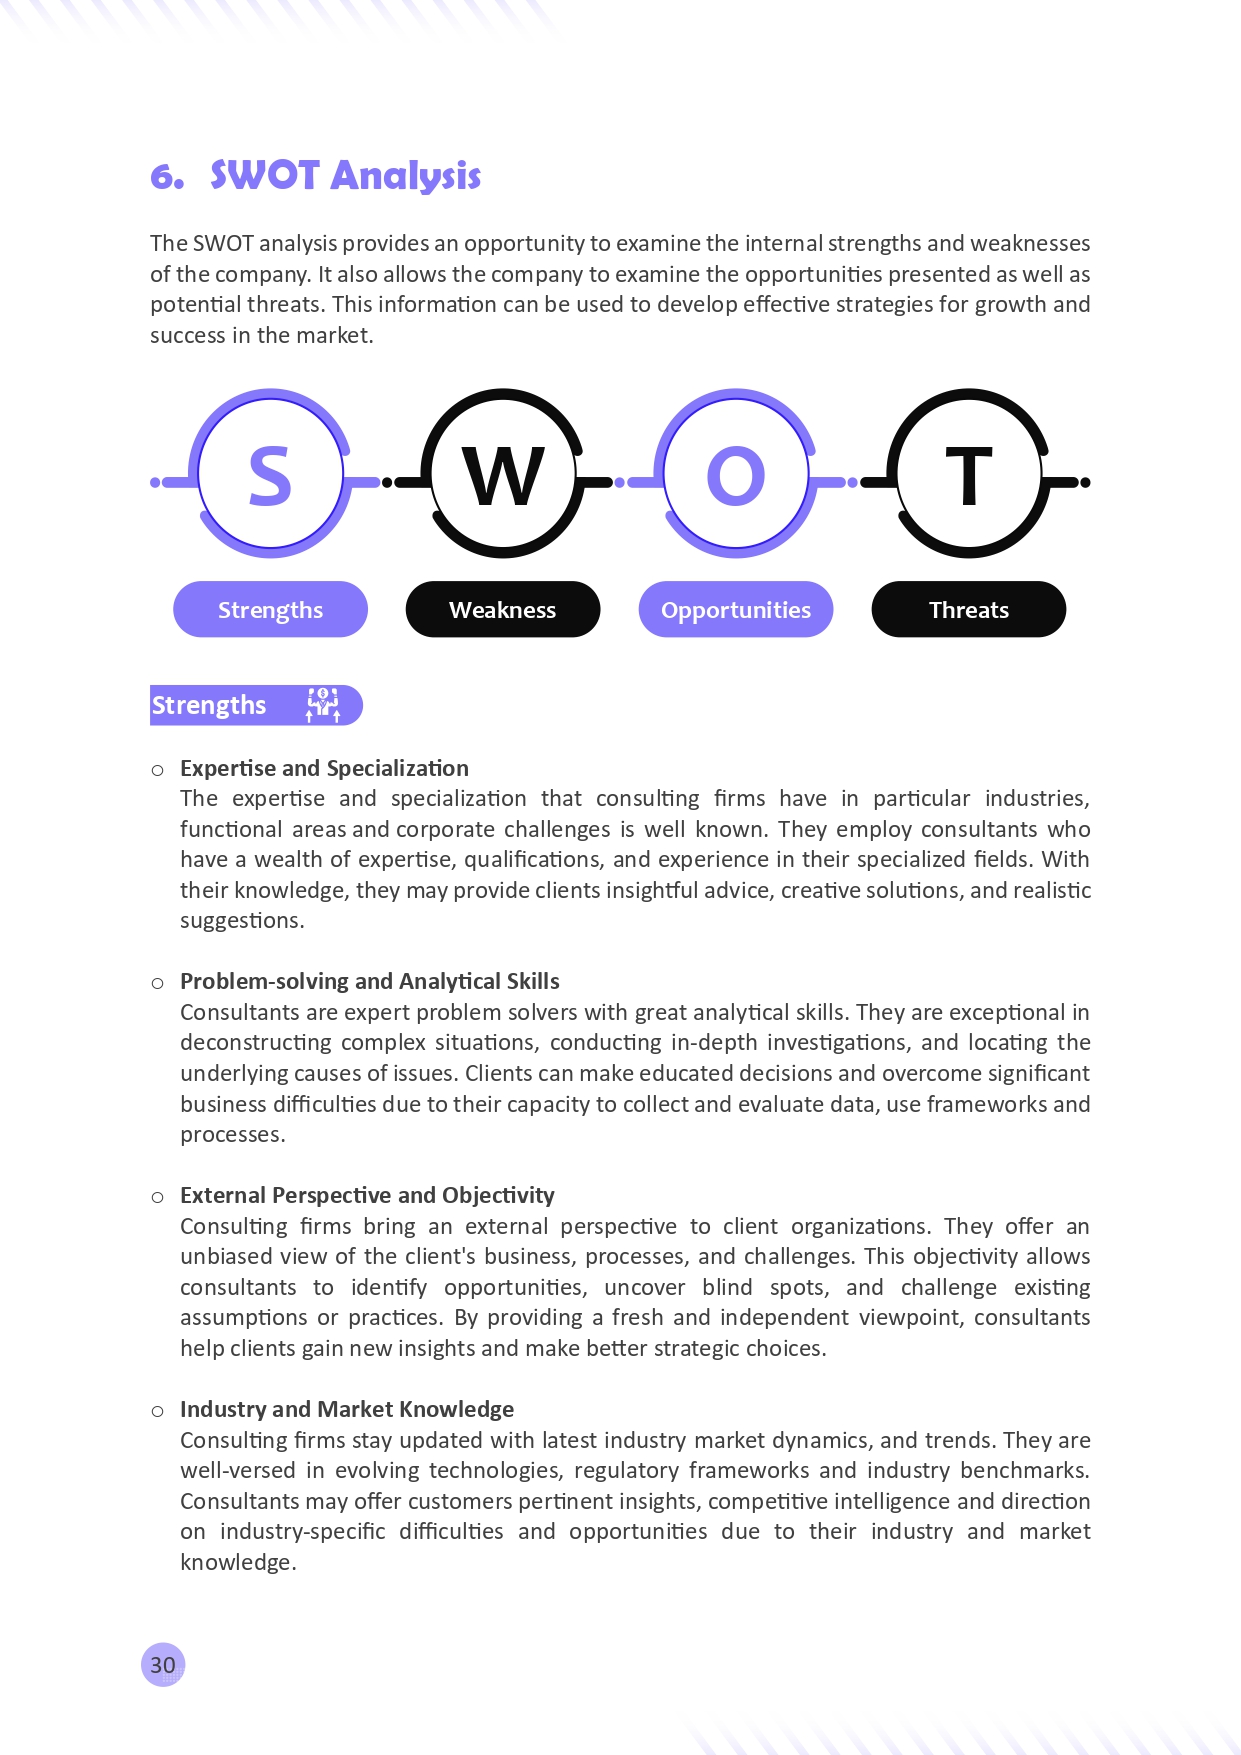 SWOT Analysis and Porter’s Competitive Analysis